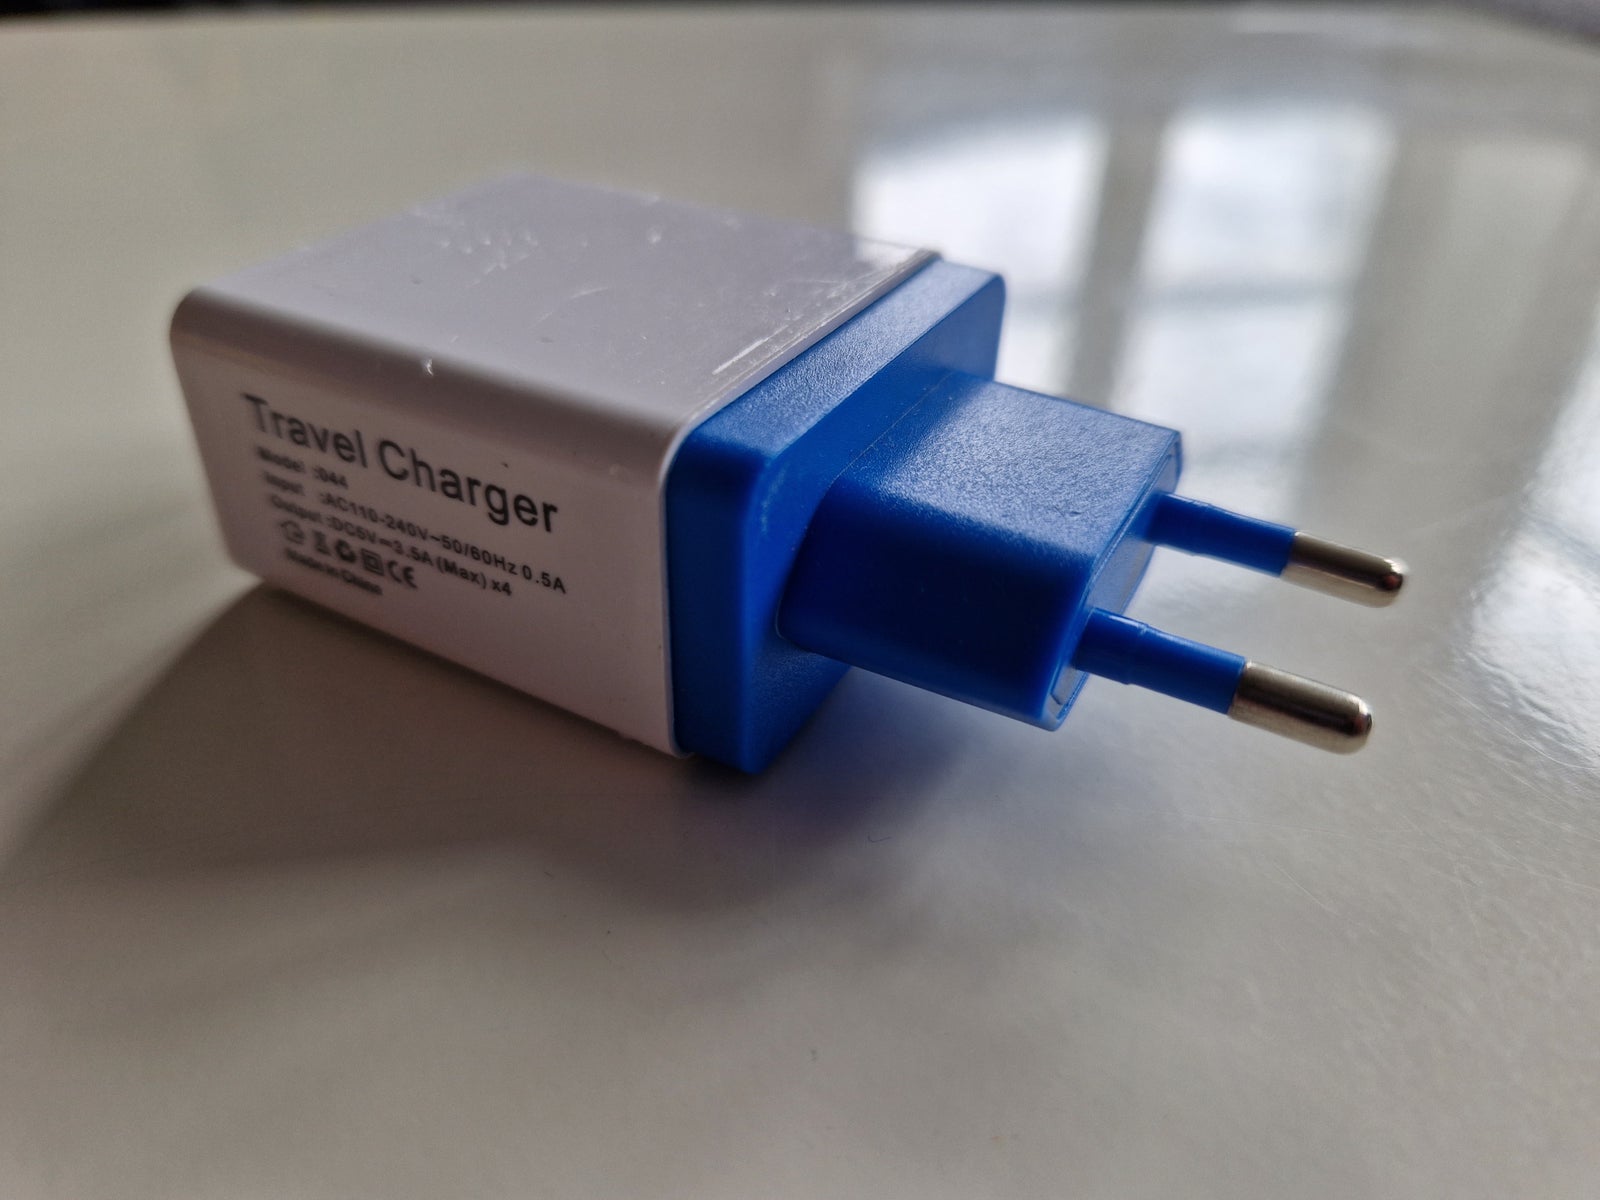 Oplader, Qualcomm Quick charge 3.0